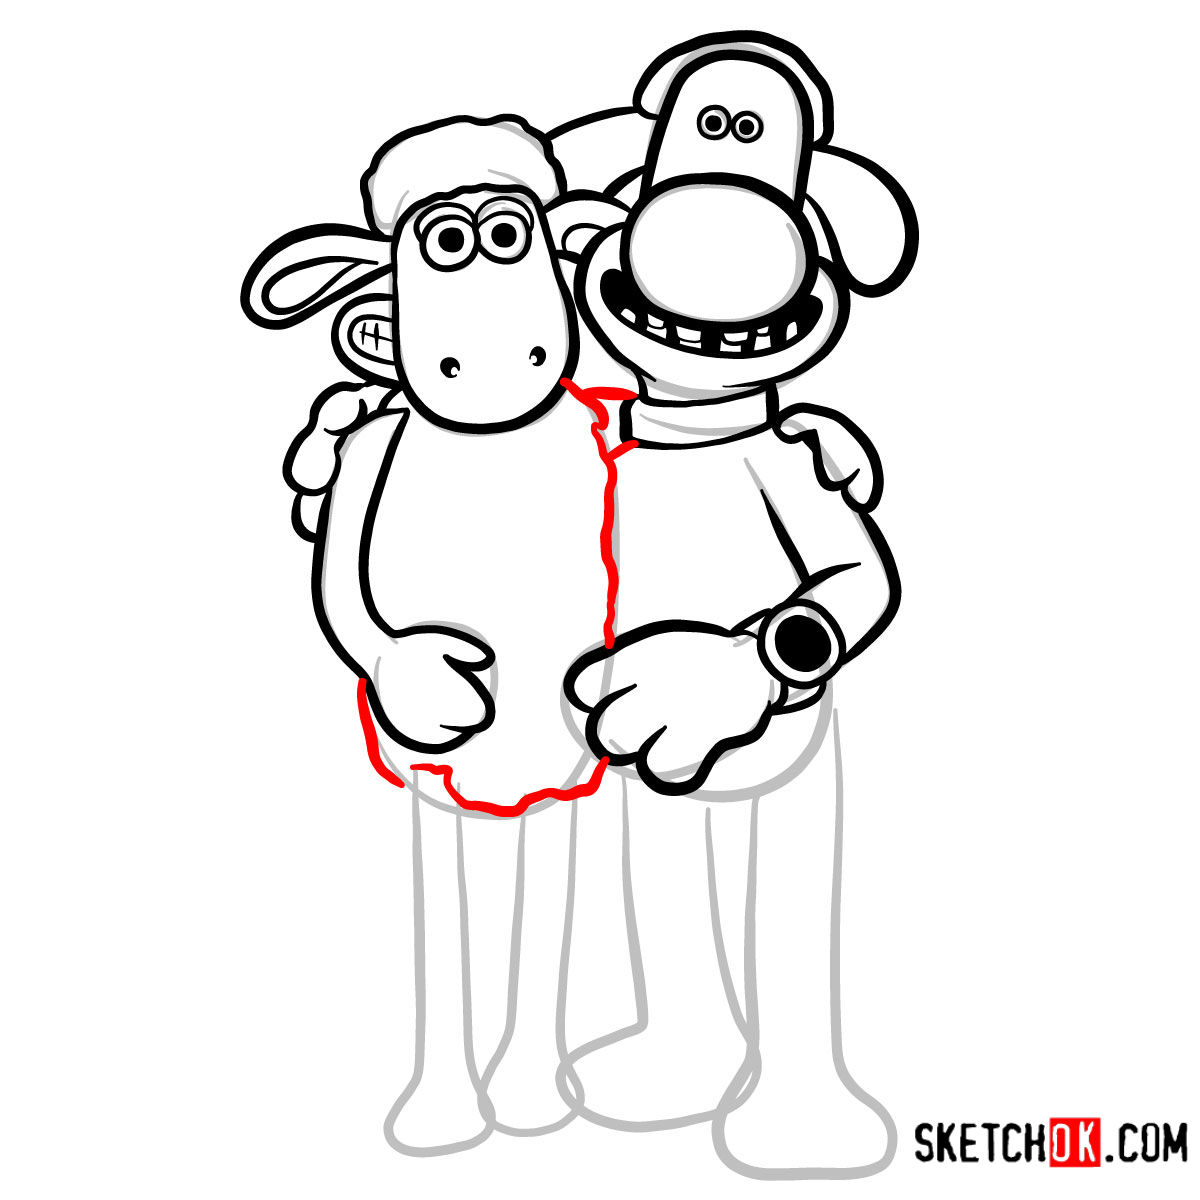 How to draw Shaun the Sheep and Bitzer together - step 10